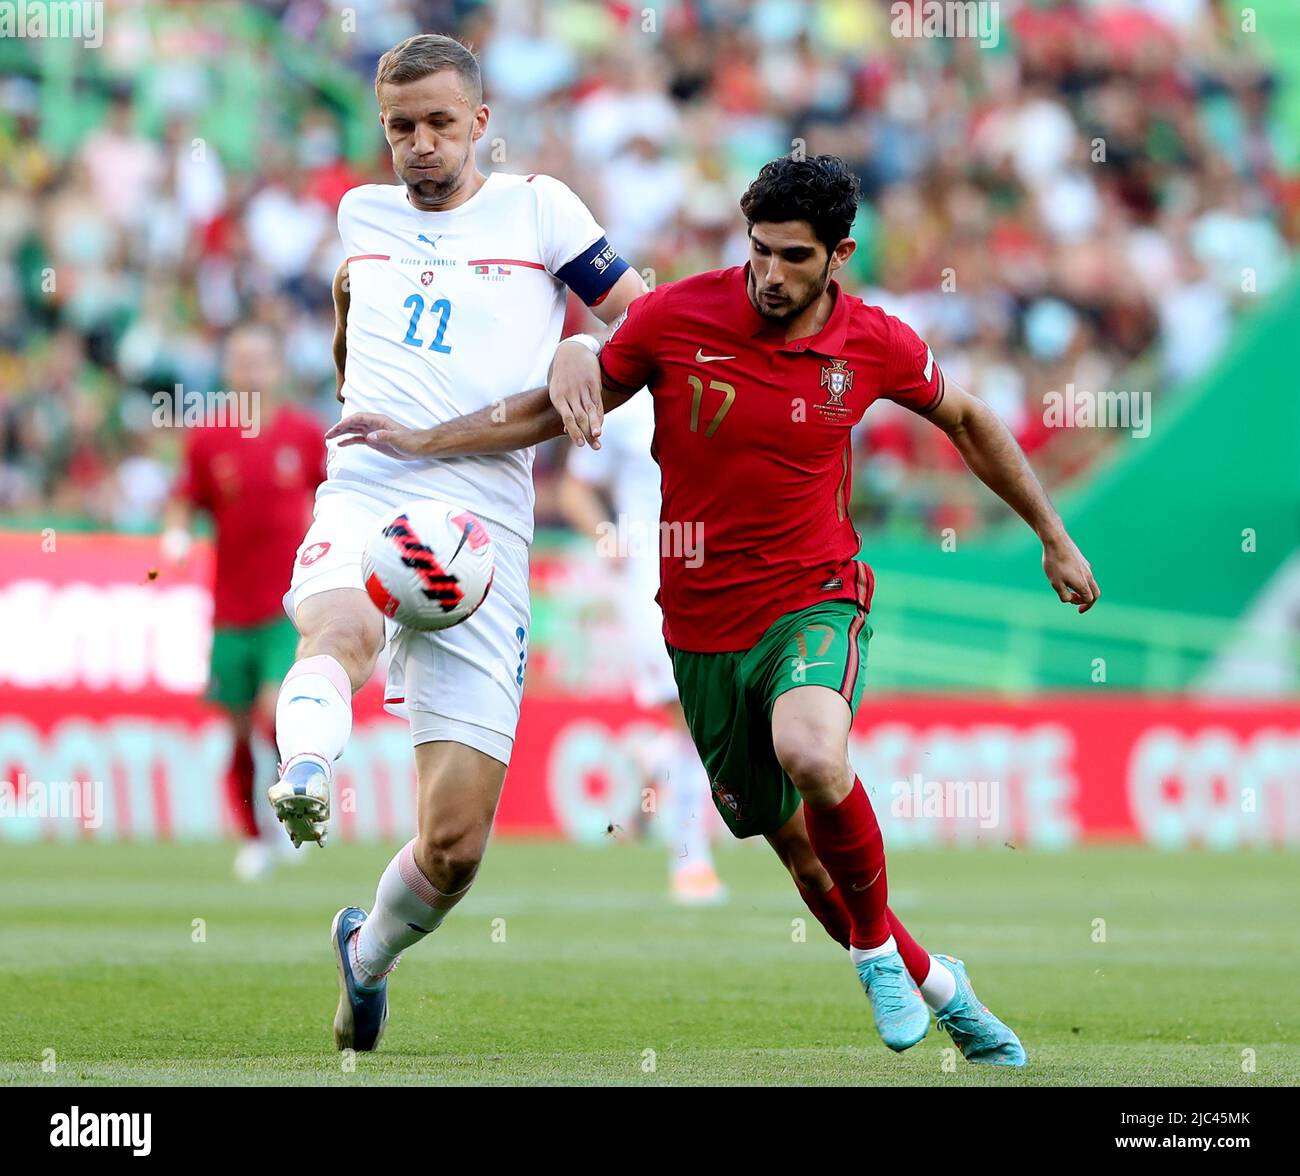 Lisbon, Portugal. 9th June, 2022. Tomas Soucek (L) of the Czech Republic vies with Goncalo Guedes of Portugal during their UEFA Nations League league A football match at the Jose Alvalade stadium in Lisbon, Portugal, on June 9, 2022. Credit: Pedro Fiuza/Xinhua/Alamy Live News Stock Photo